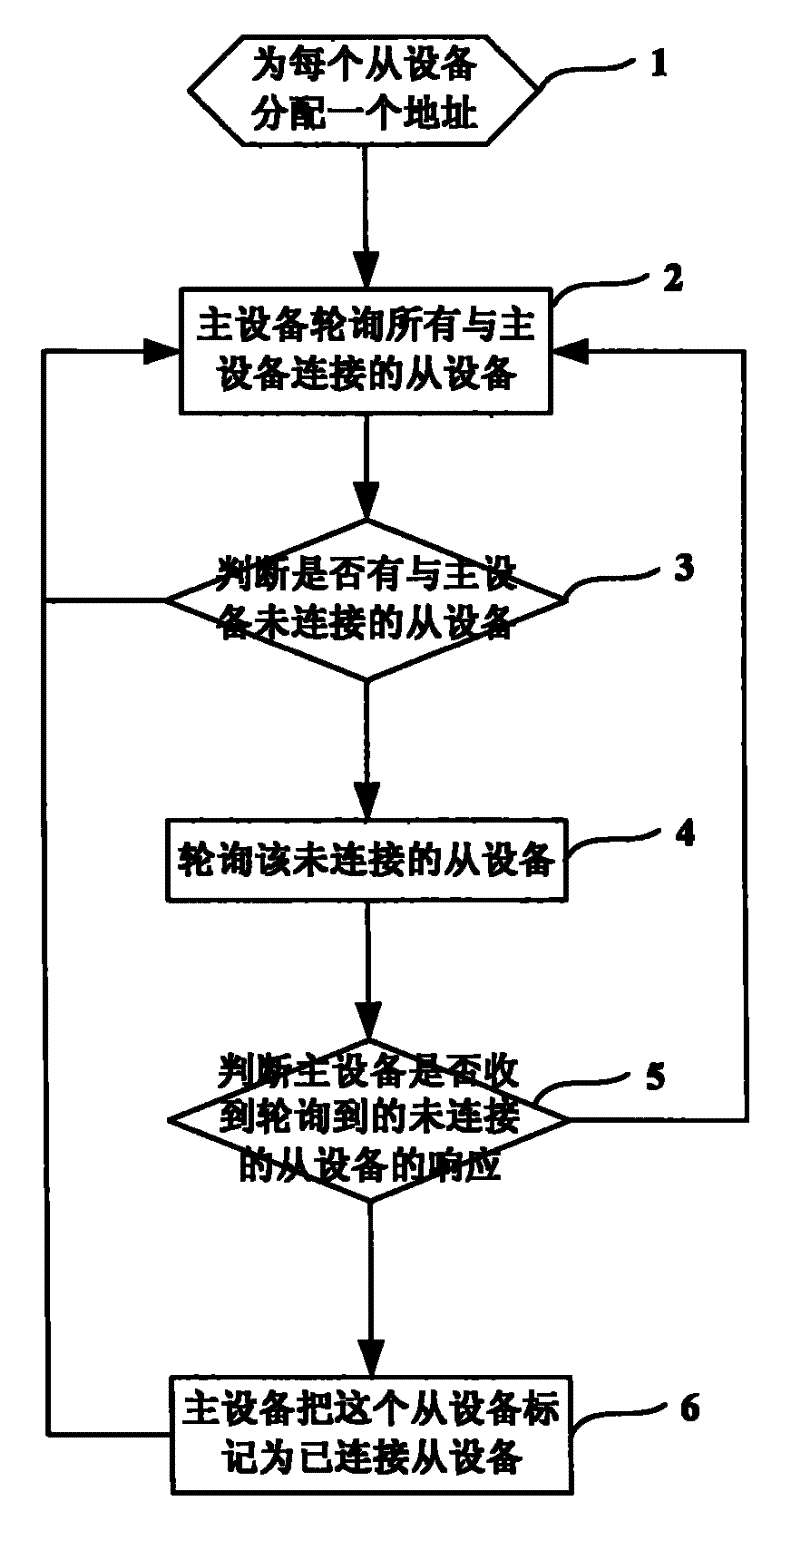 Method for Improving Communication Efficiency by Improving Device Polling Mode